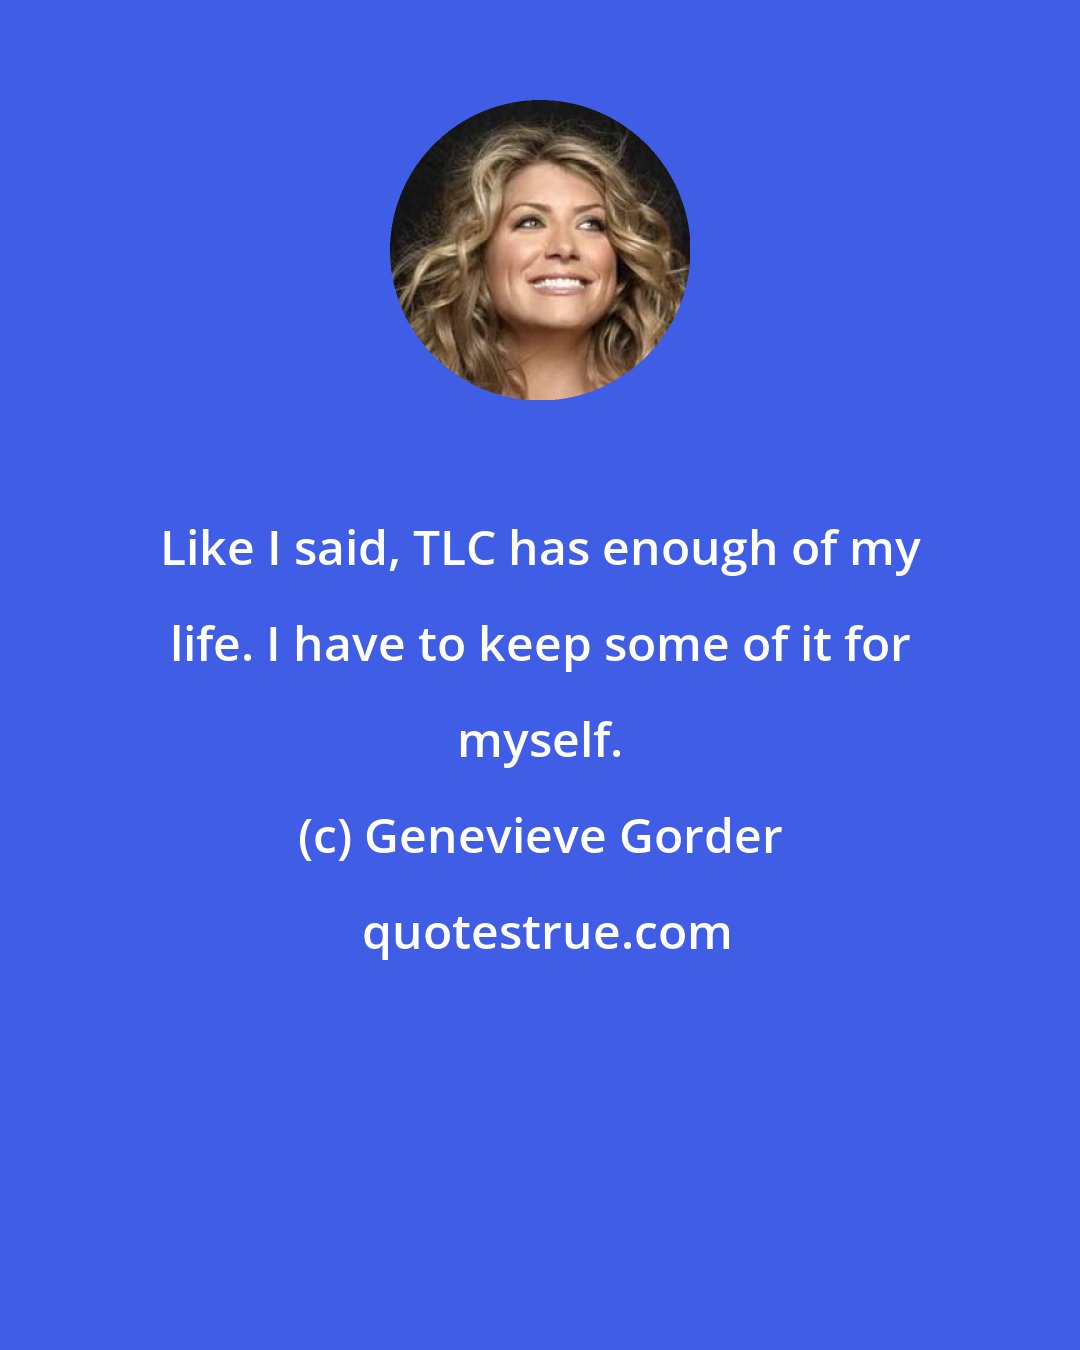 Genevieve Gorder: Like I said, TLC has enough of my life. I have to keep some of it for myself.